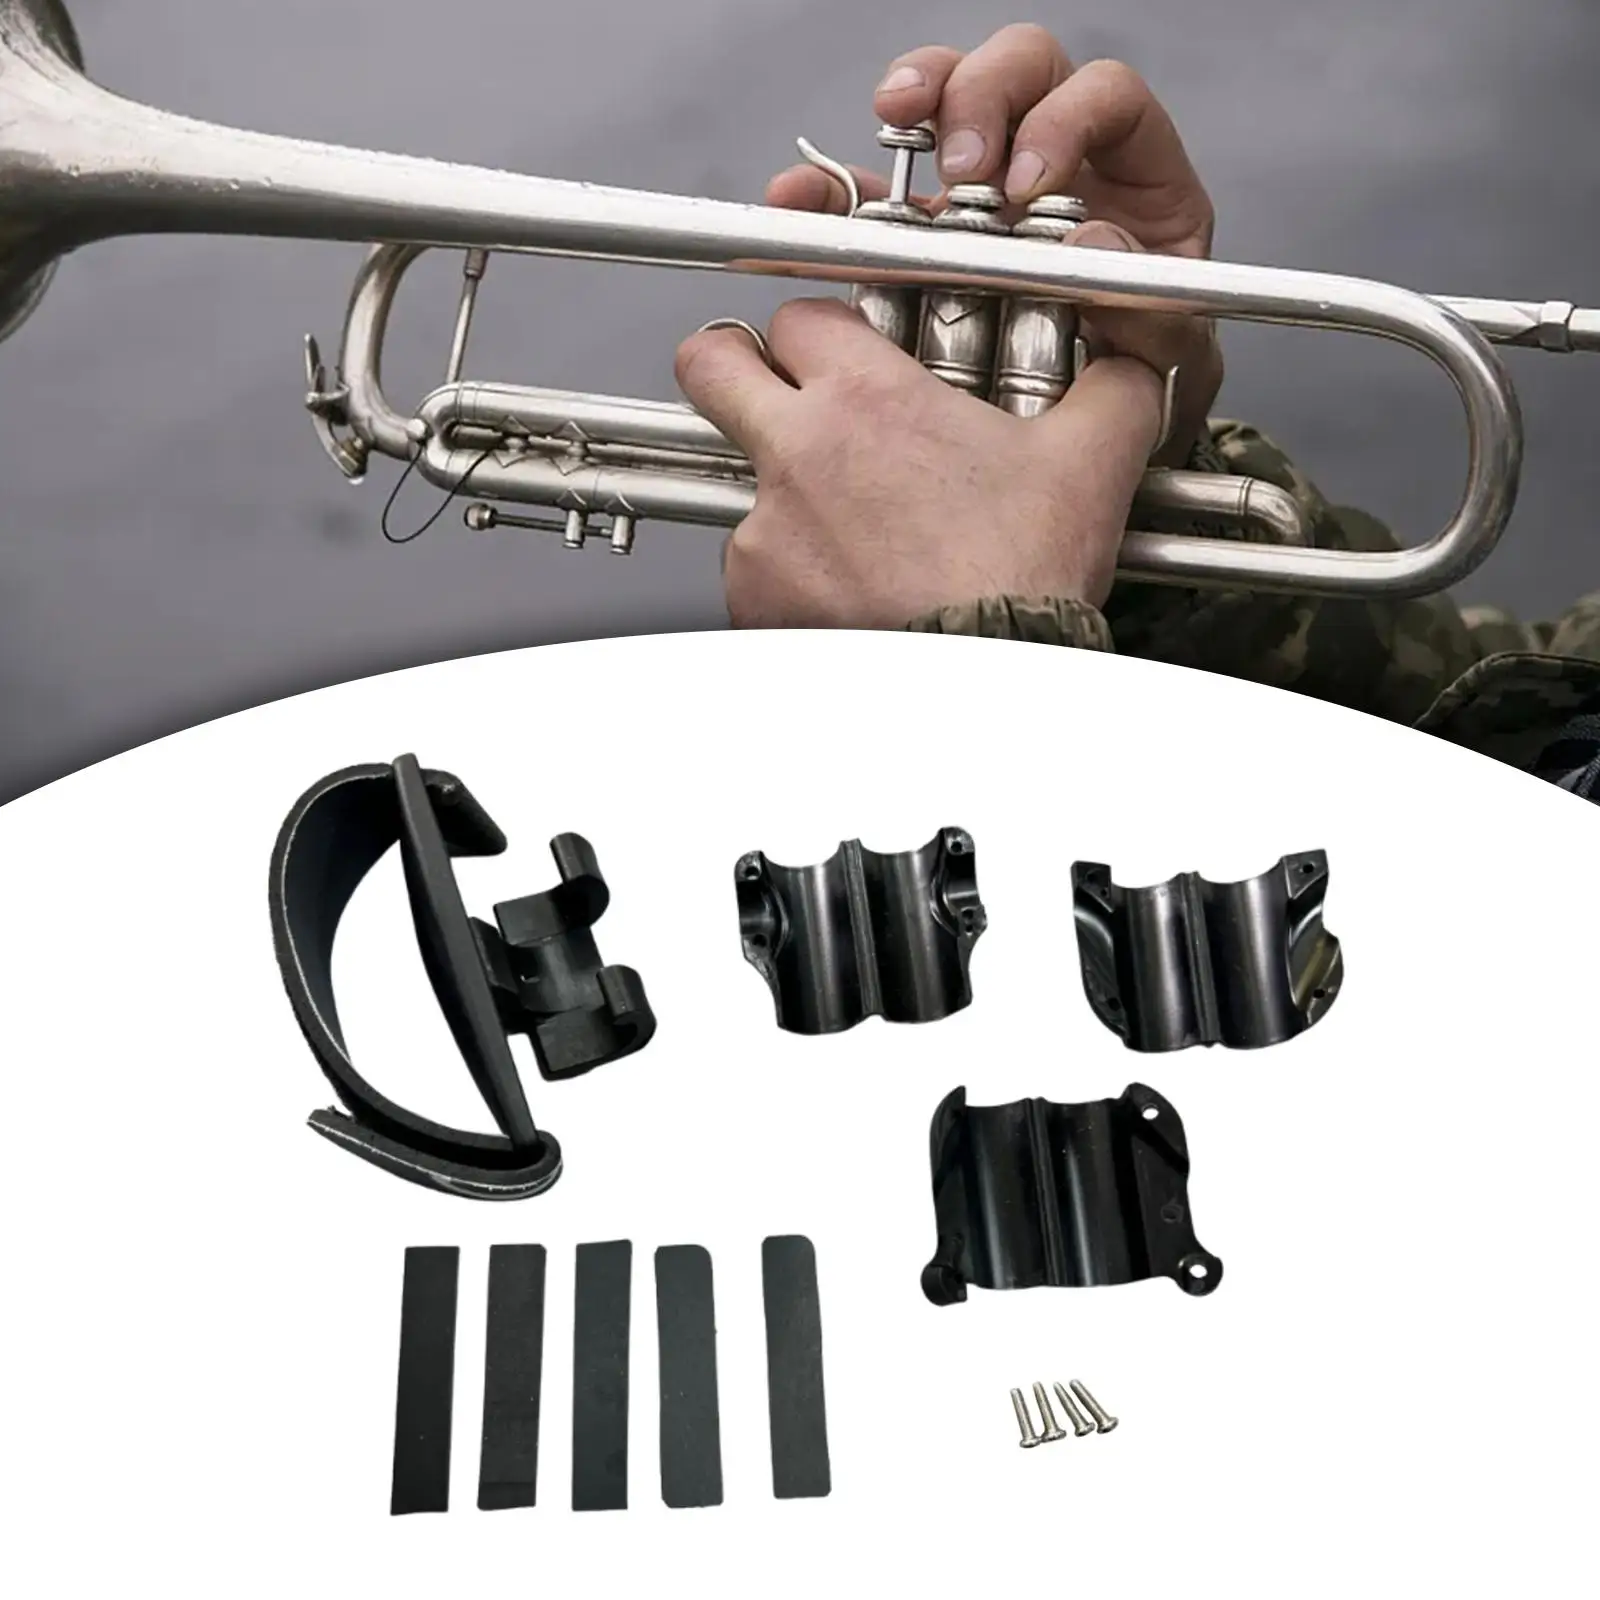 Trombone Grip Practical Maintain A Proper Playing Position Guard Universal Easy to Install Attachments Cleaning Care Accessories